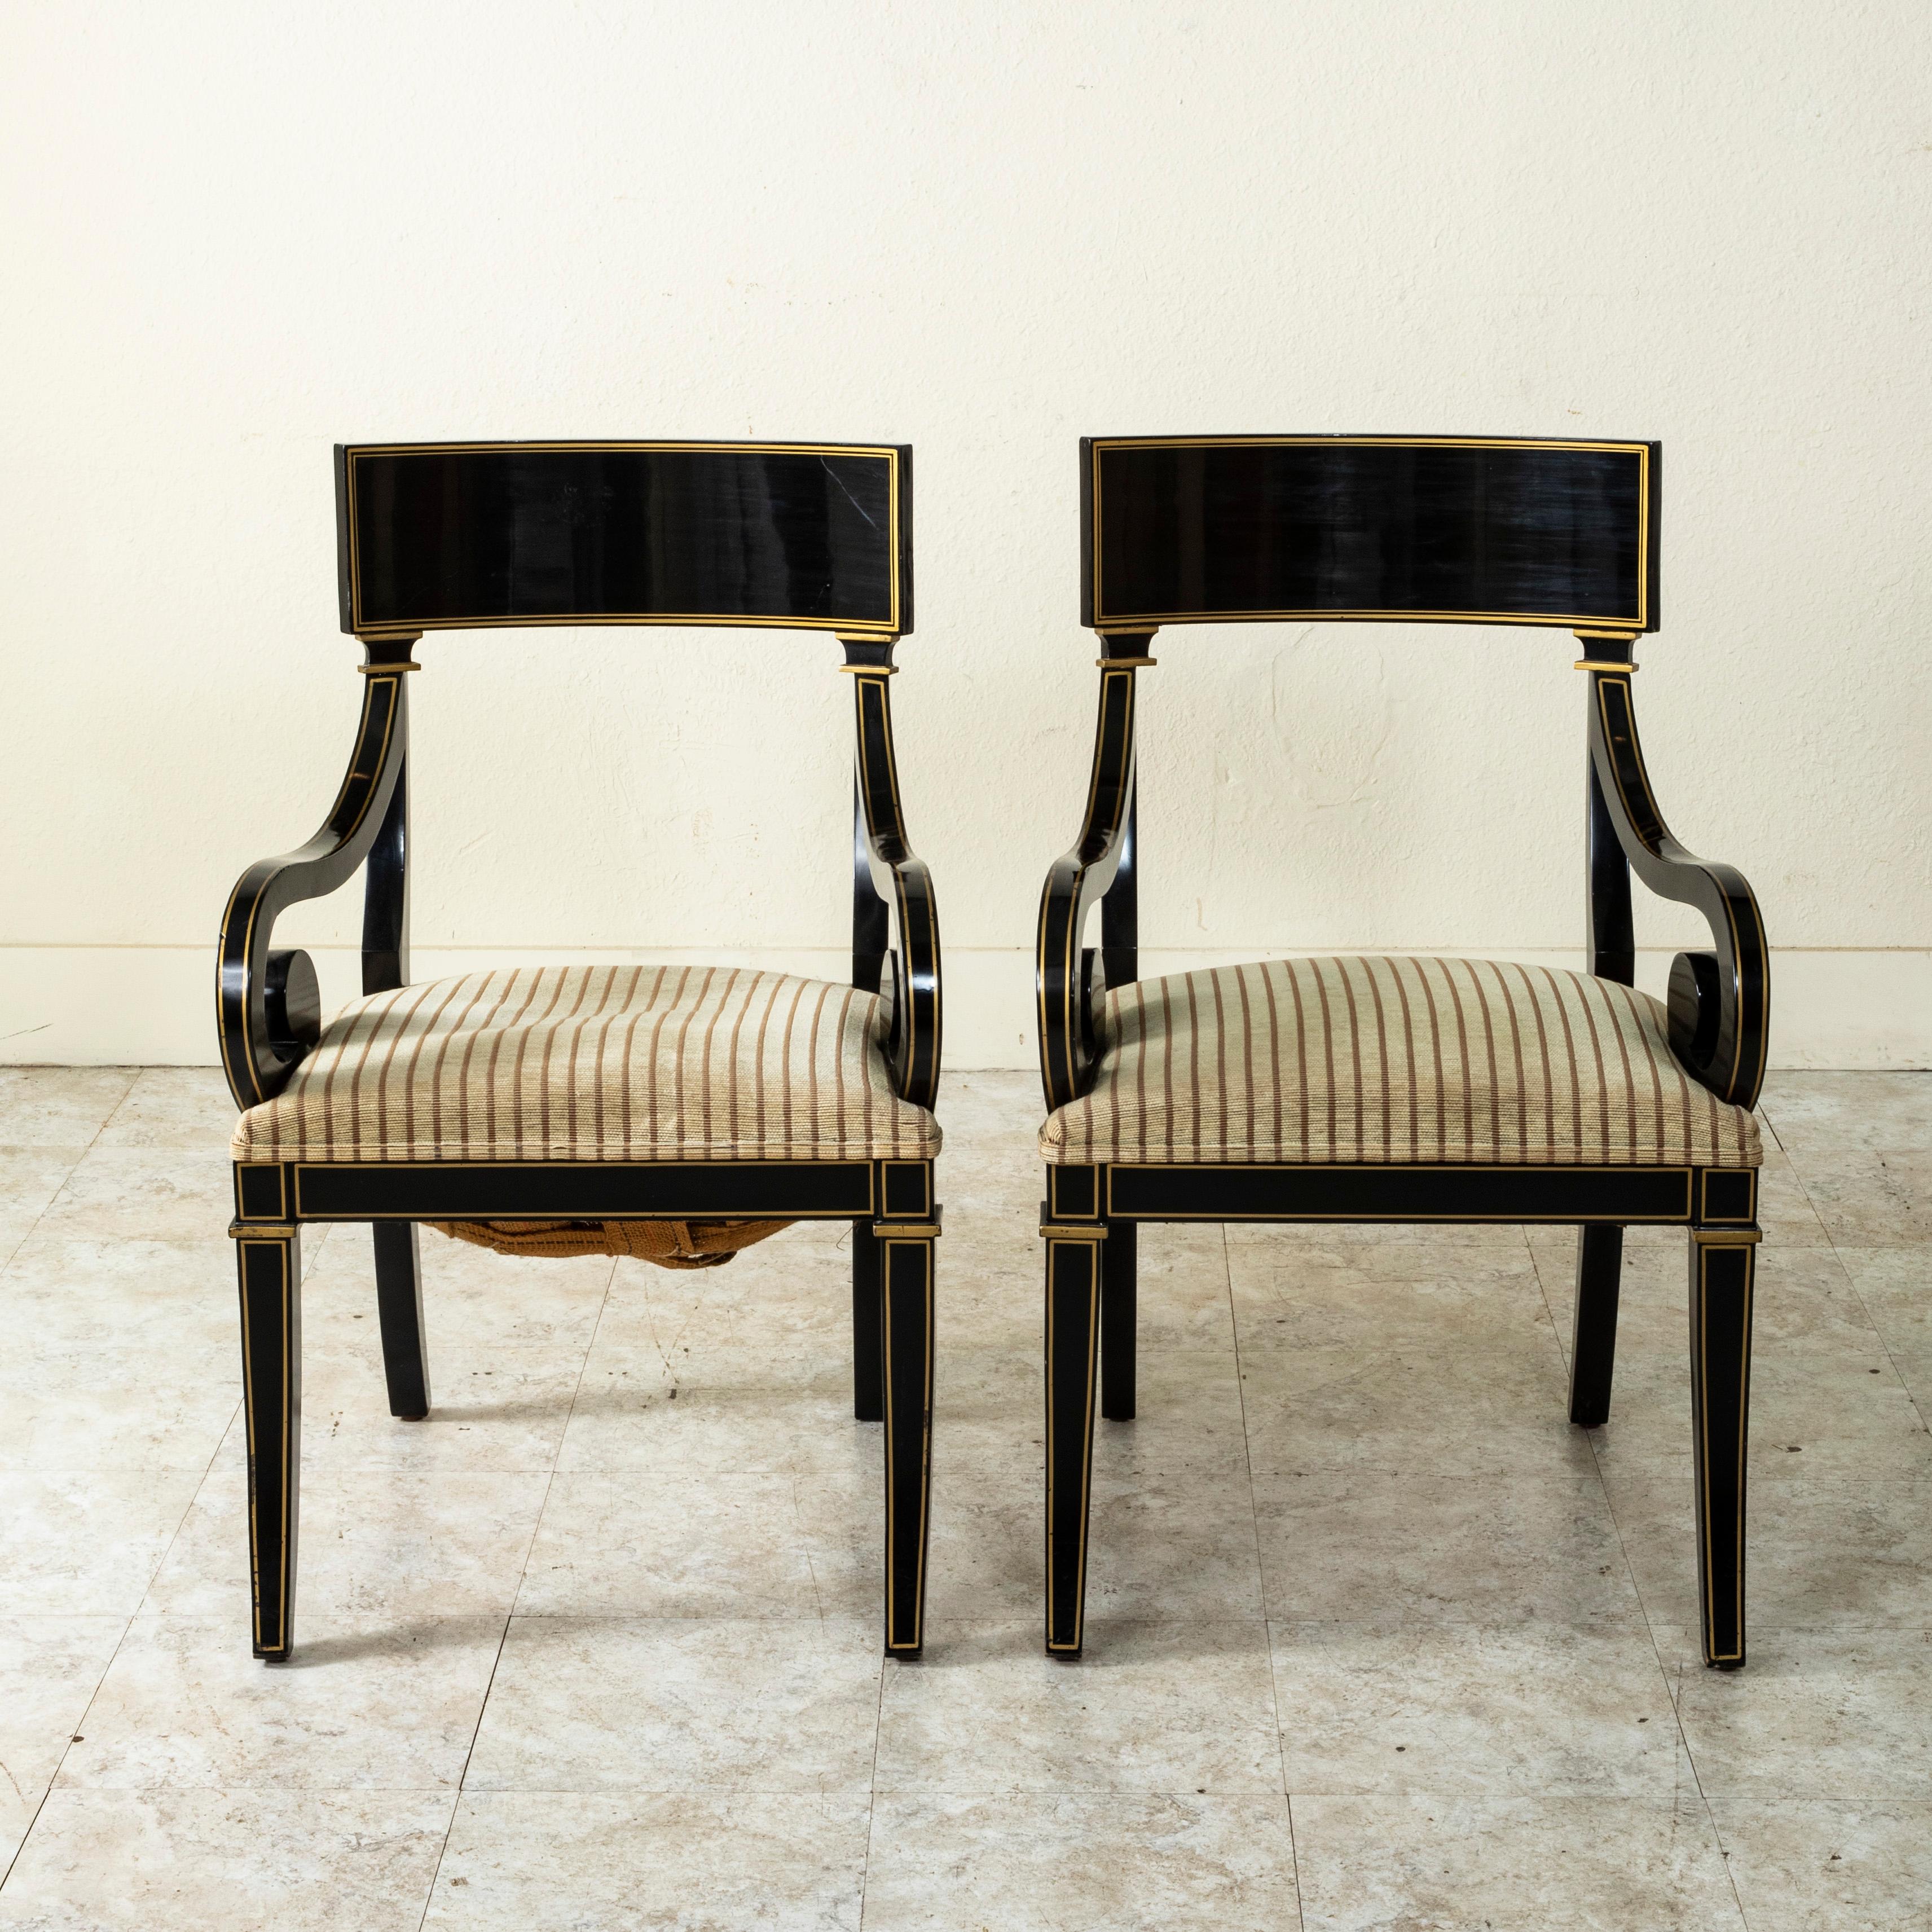 Lacquered Pair of 20th Century French Restauration Style Painted Black and Gold Armchairs